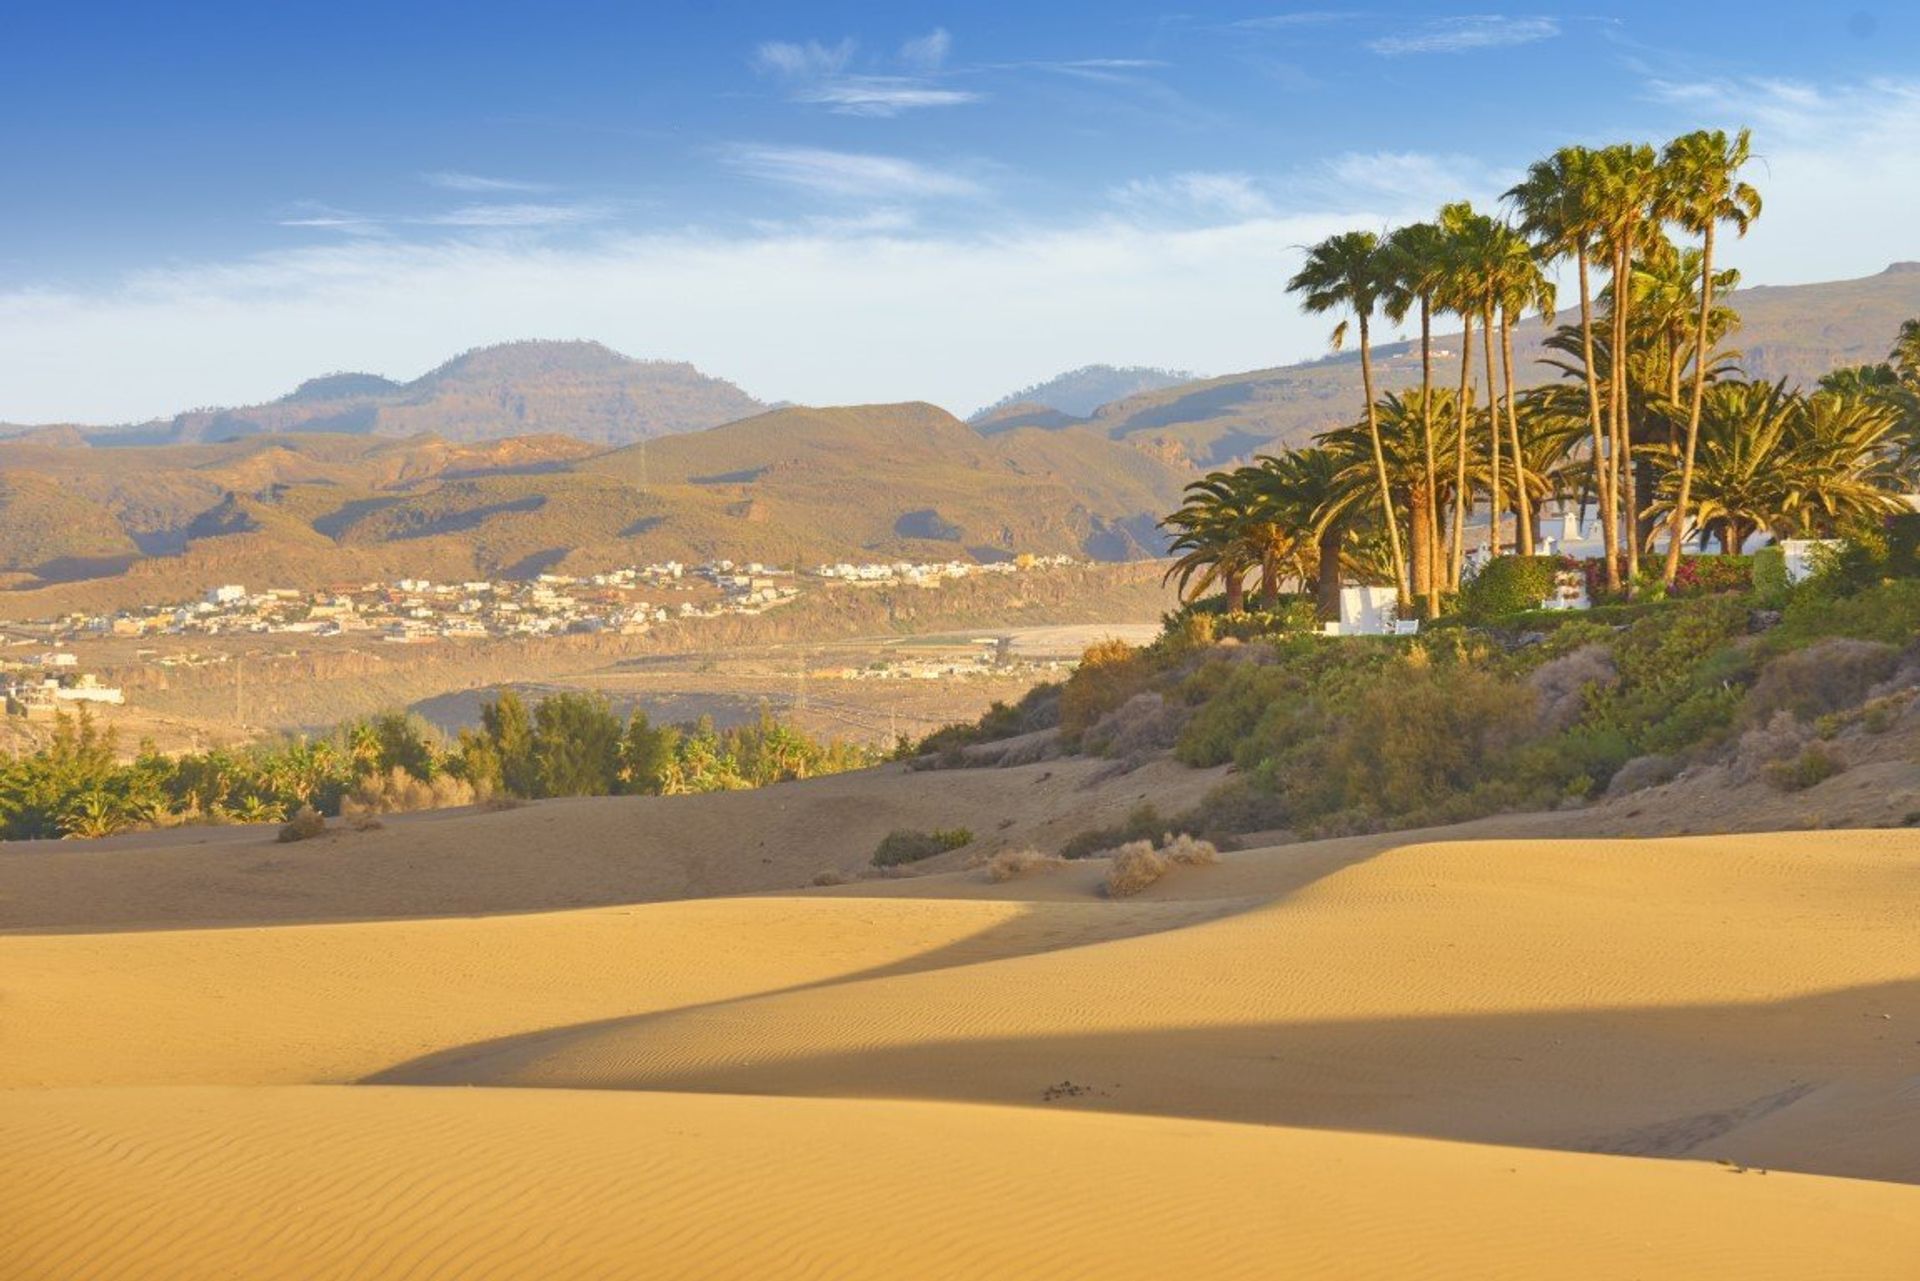 Discover the wild beauty of Maspalomas Dunes Nature Reserve with its ecosystem of exotic plants and bird life